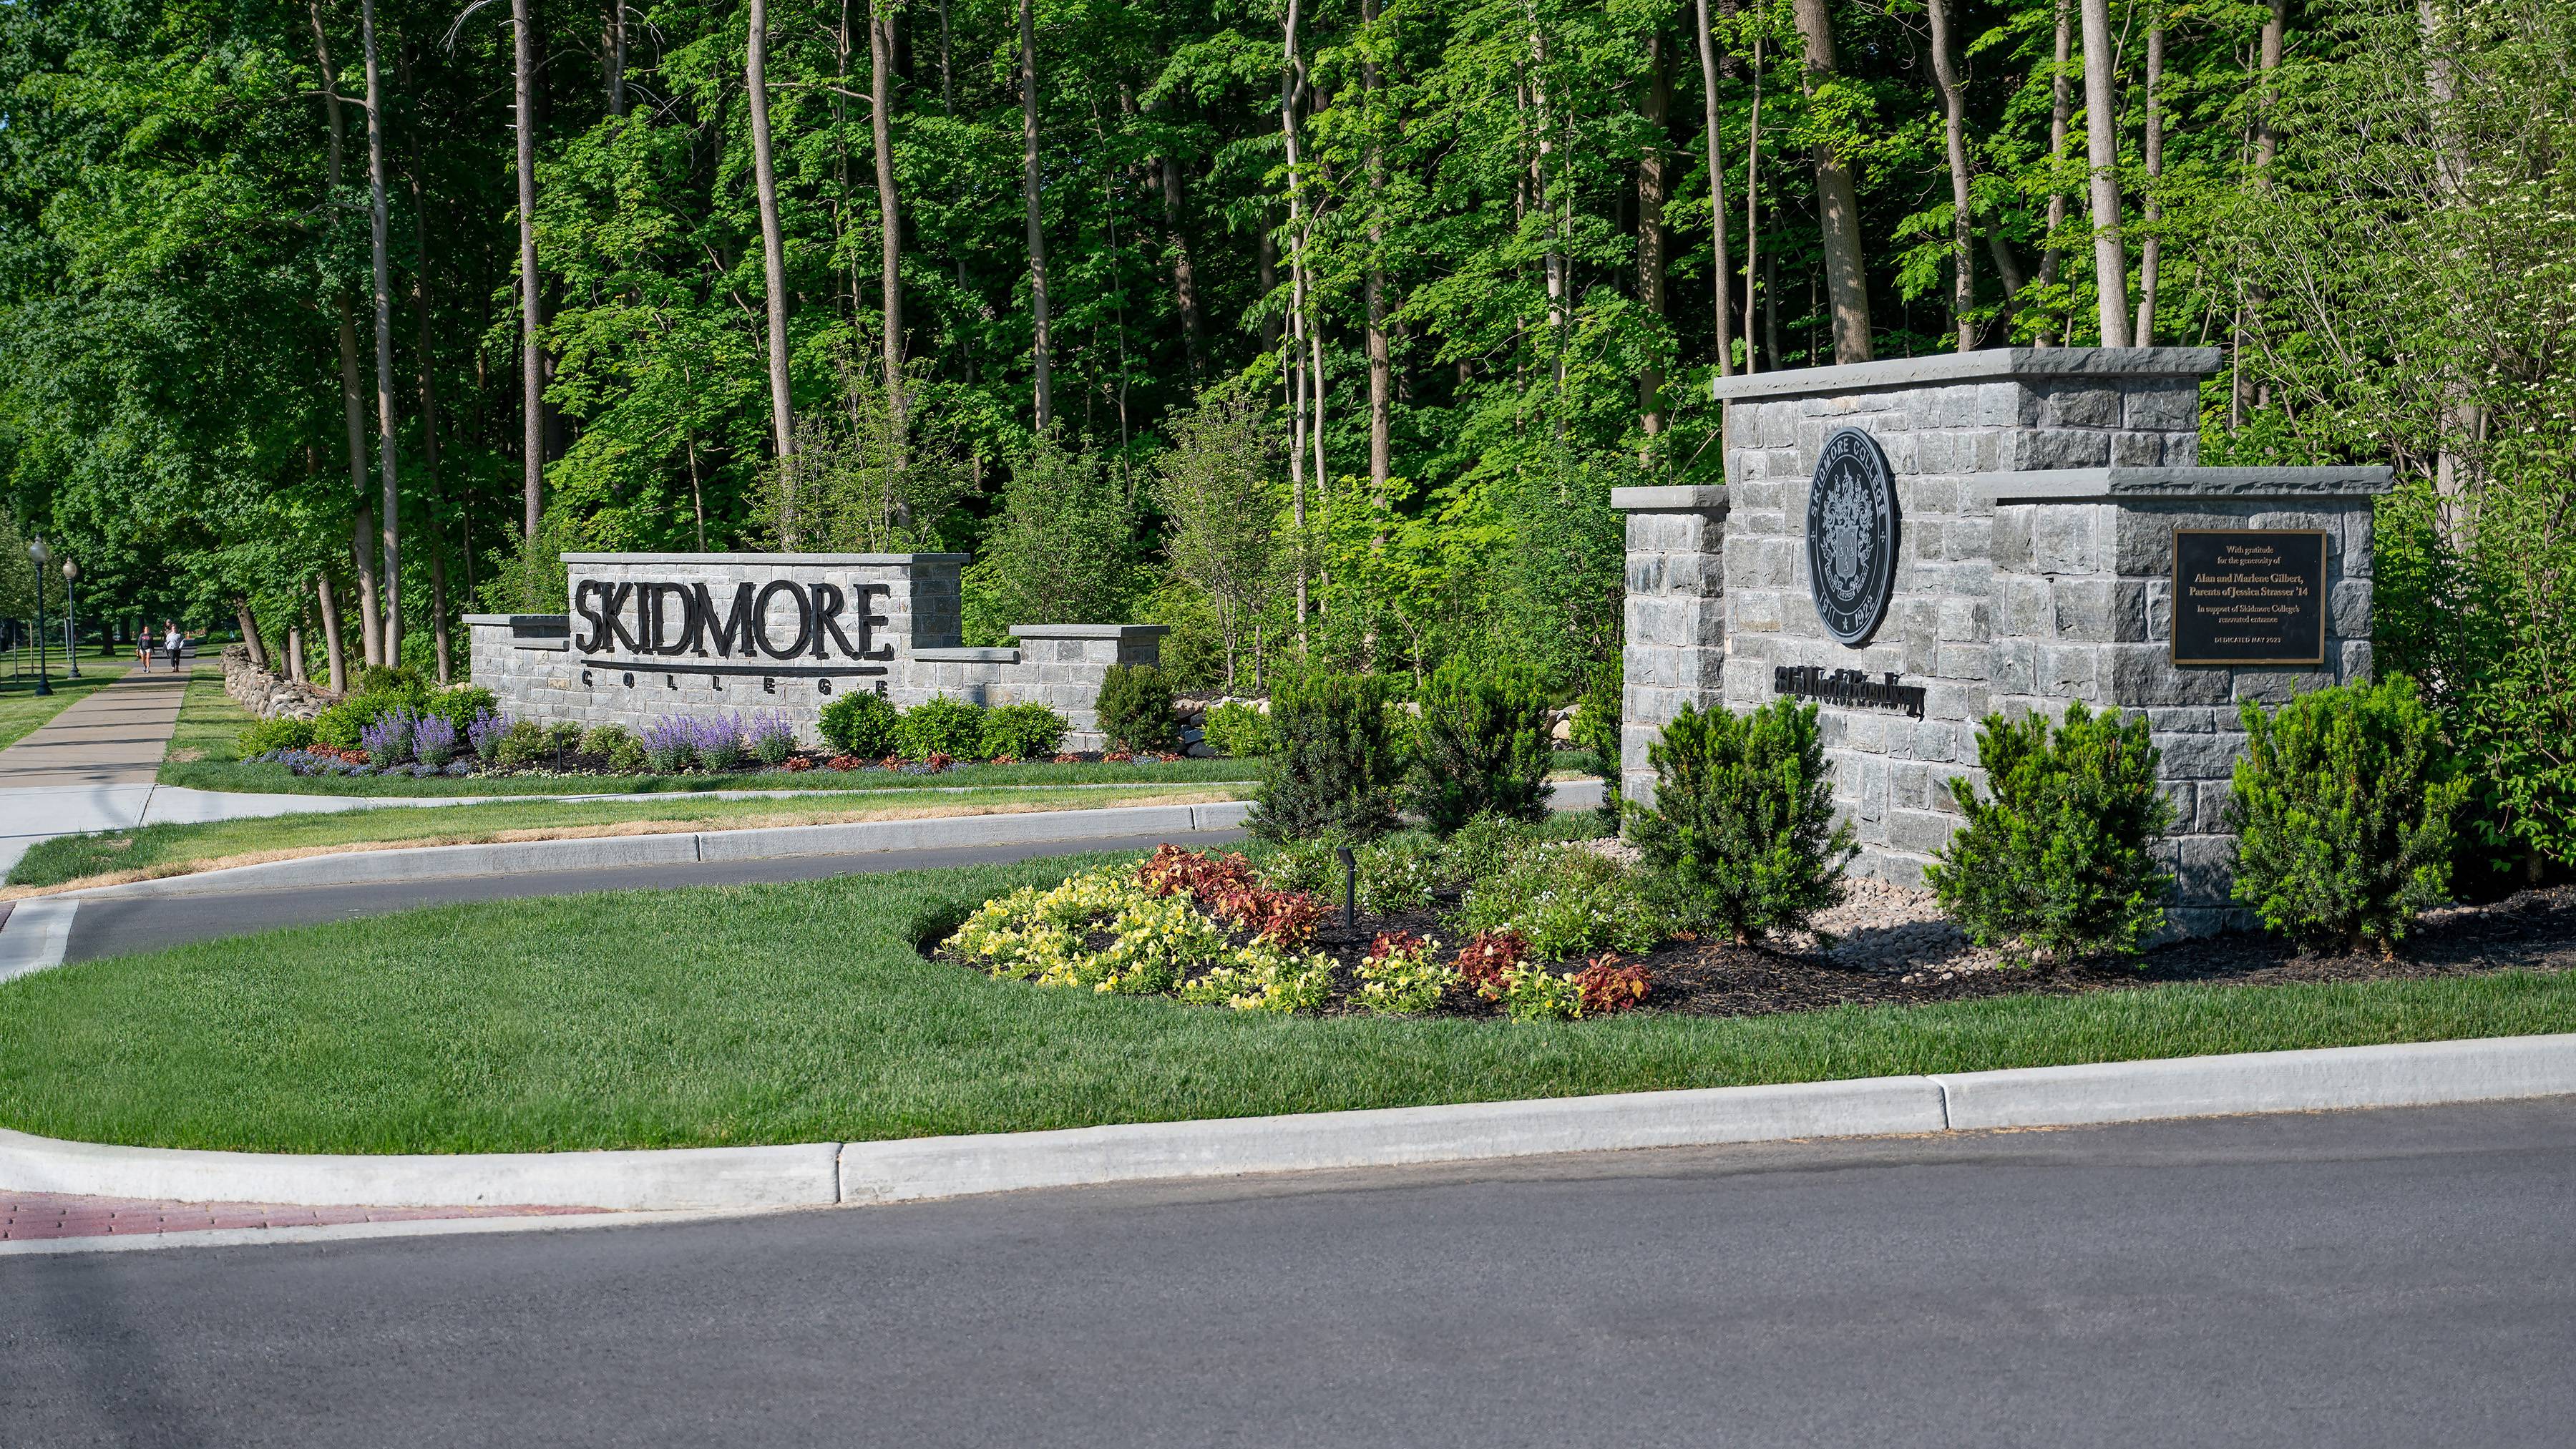 New signs and beautiful shrubbery mark the main entrance to Skidmore's campus.